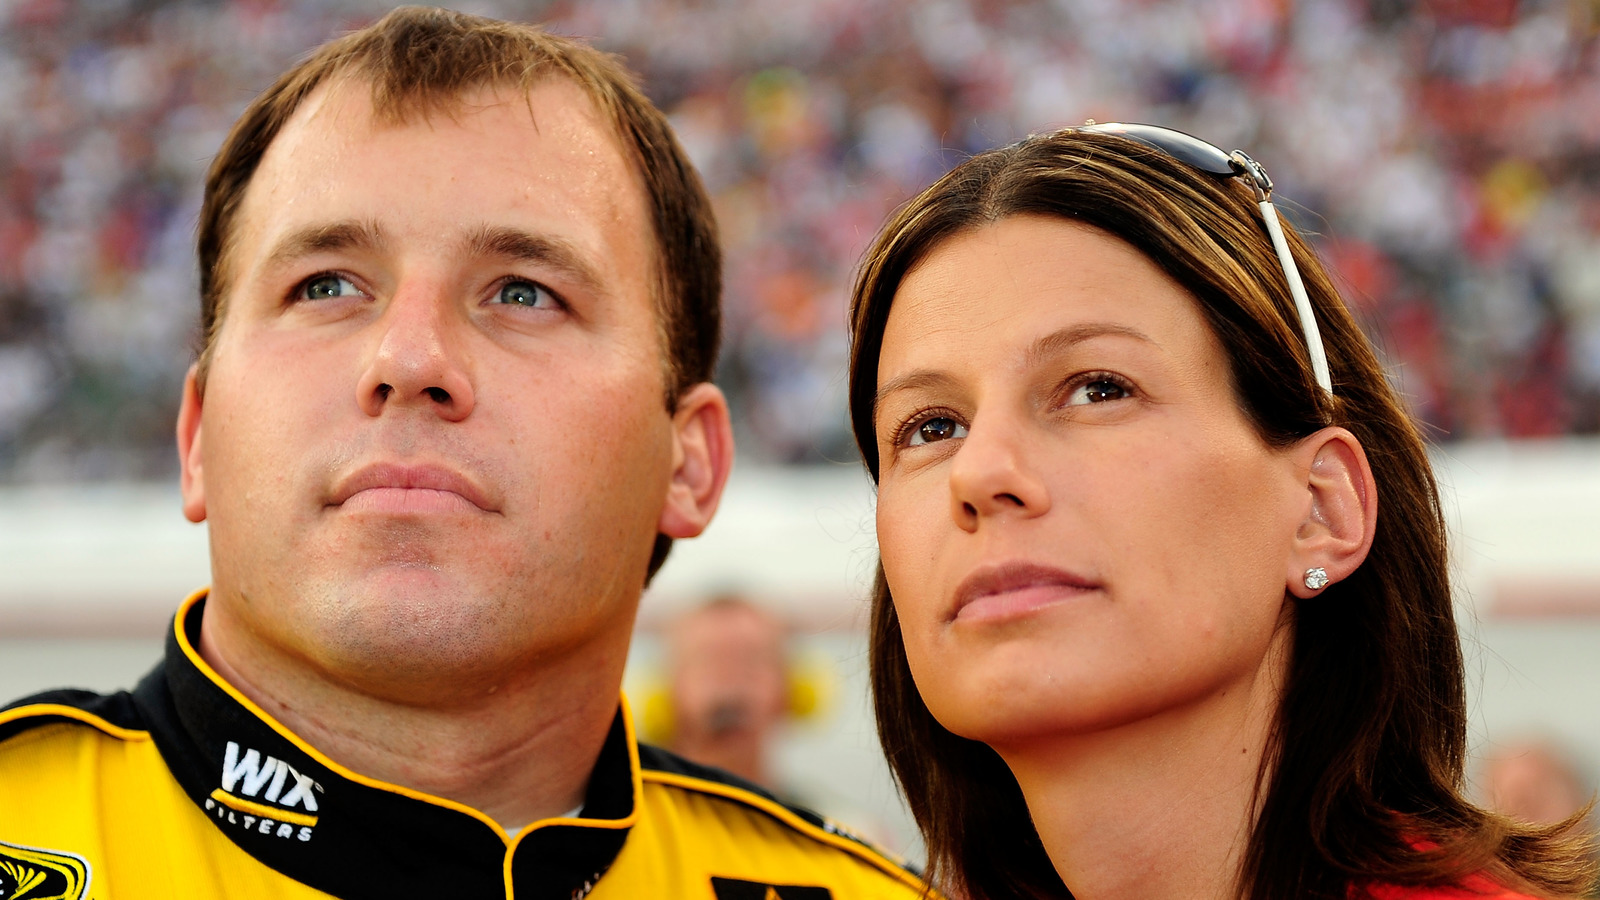 The Truth About Ryan Newman's Ex-Wife, Krissie Newman